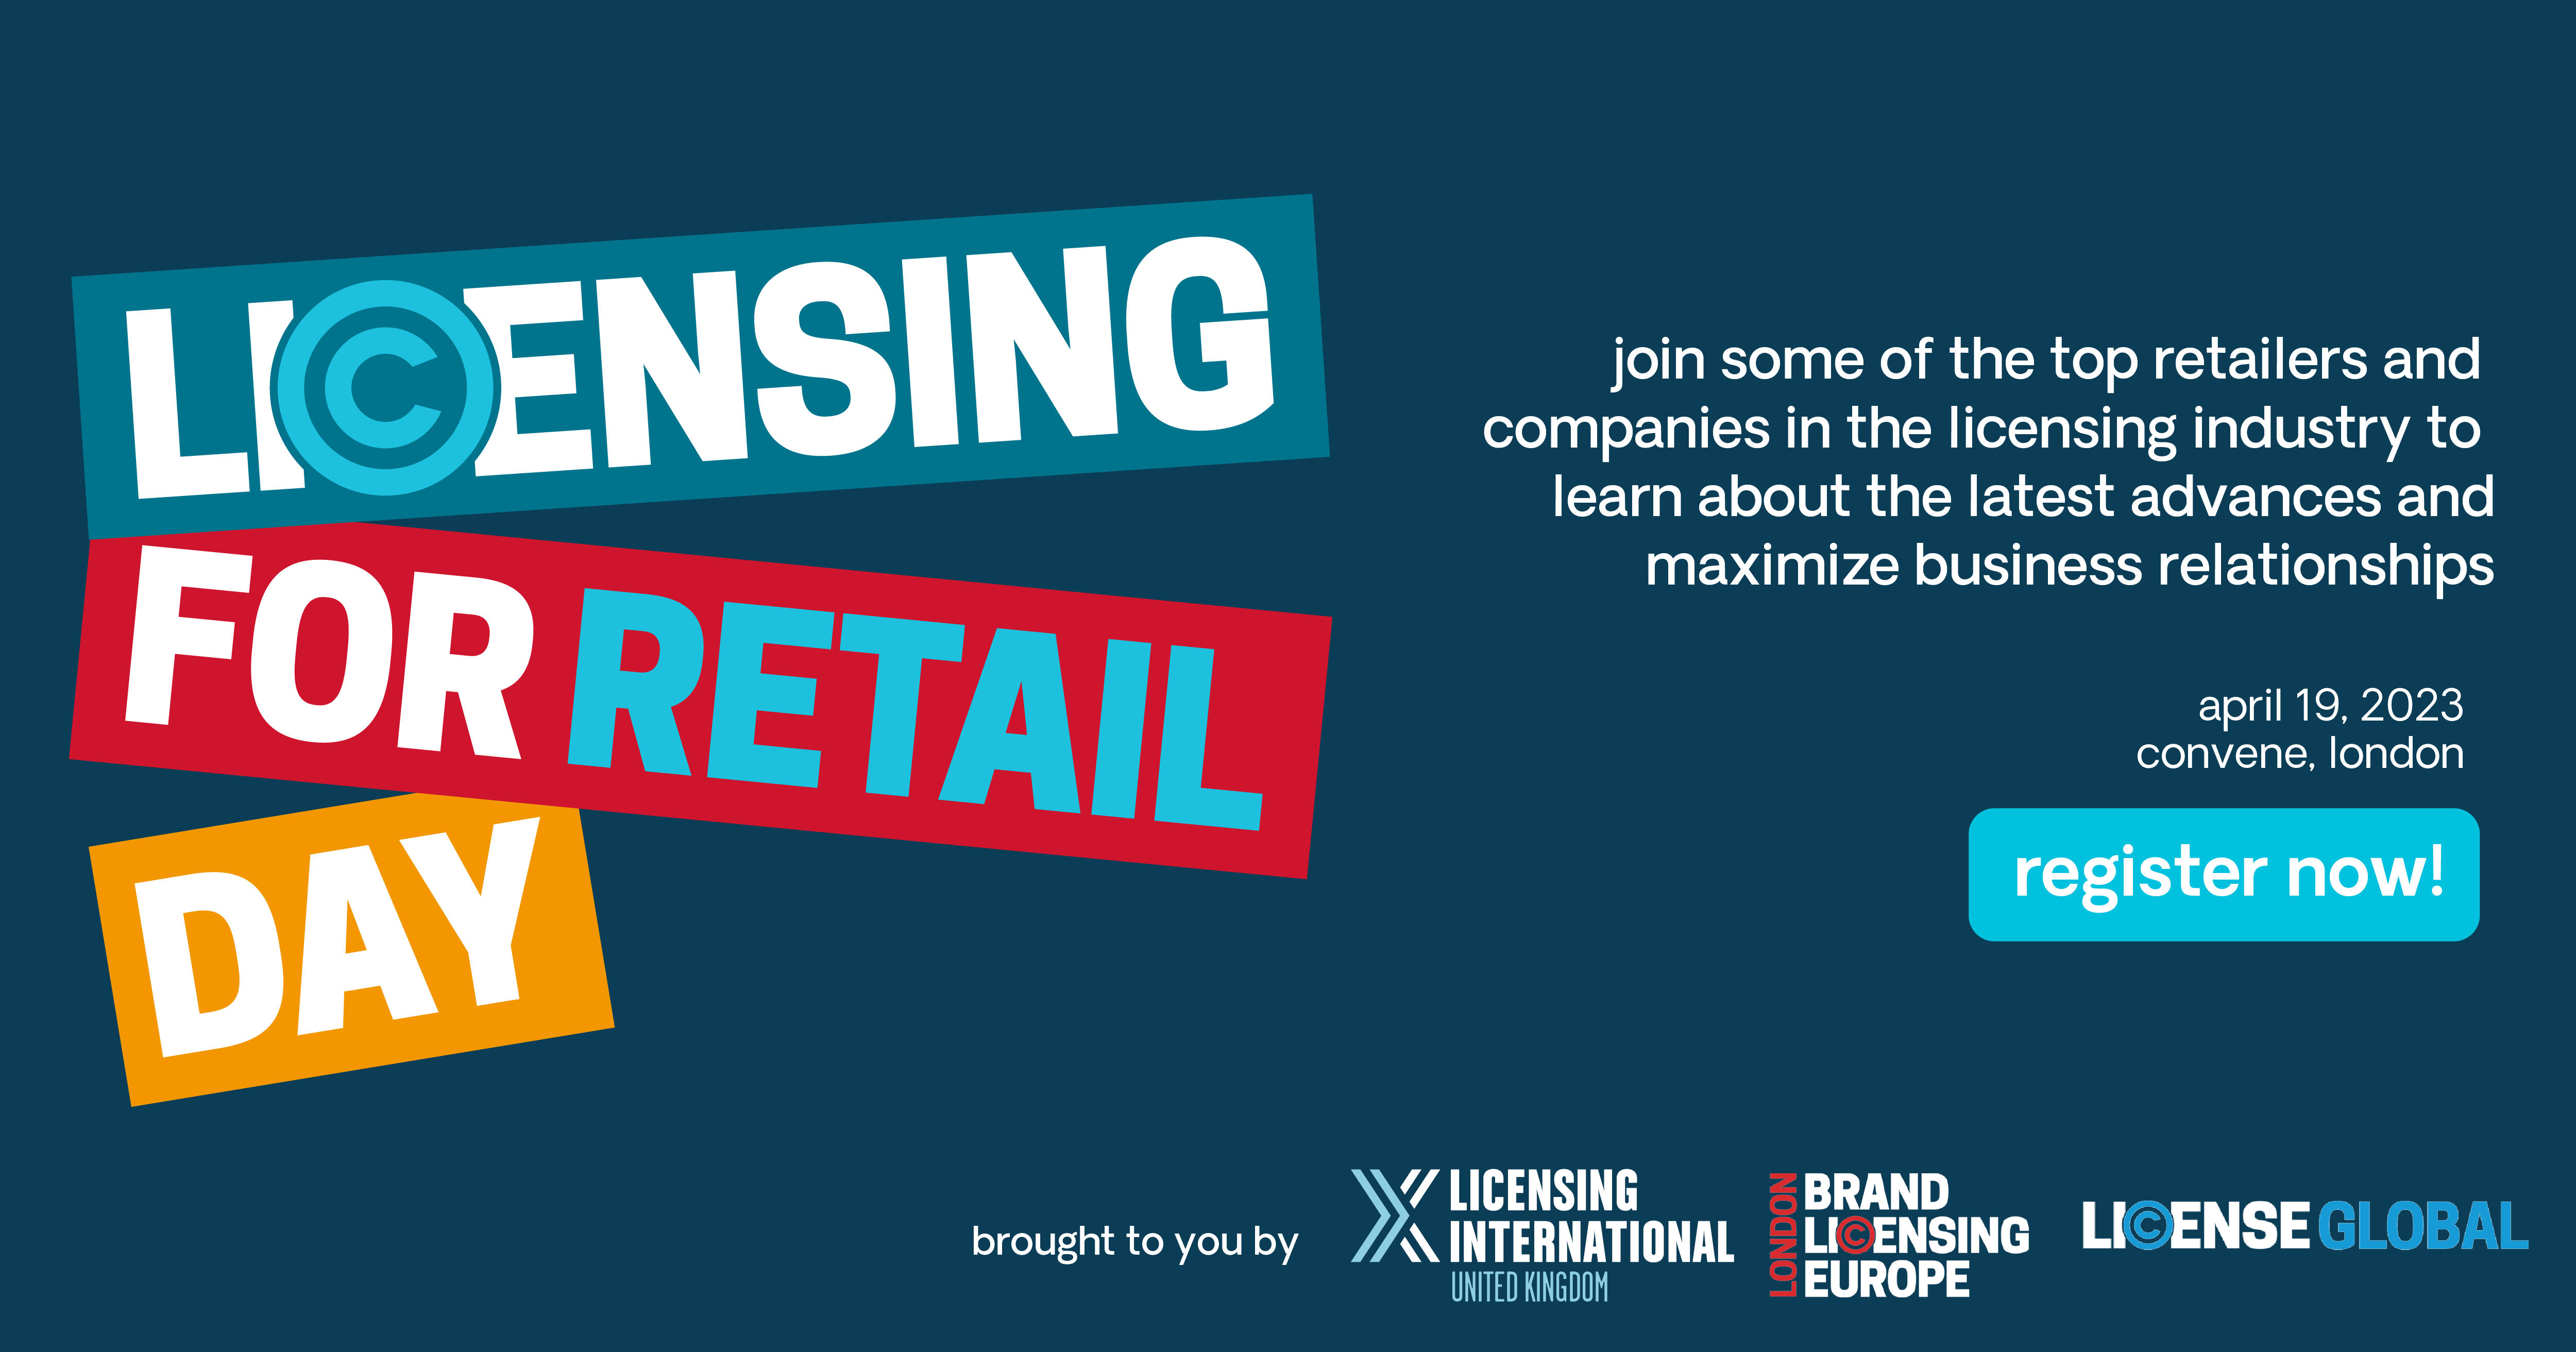 Licensing for Retail Day UK image